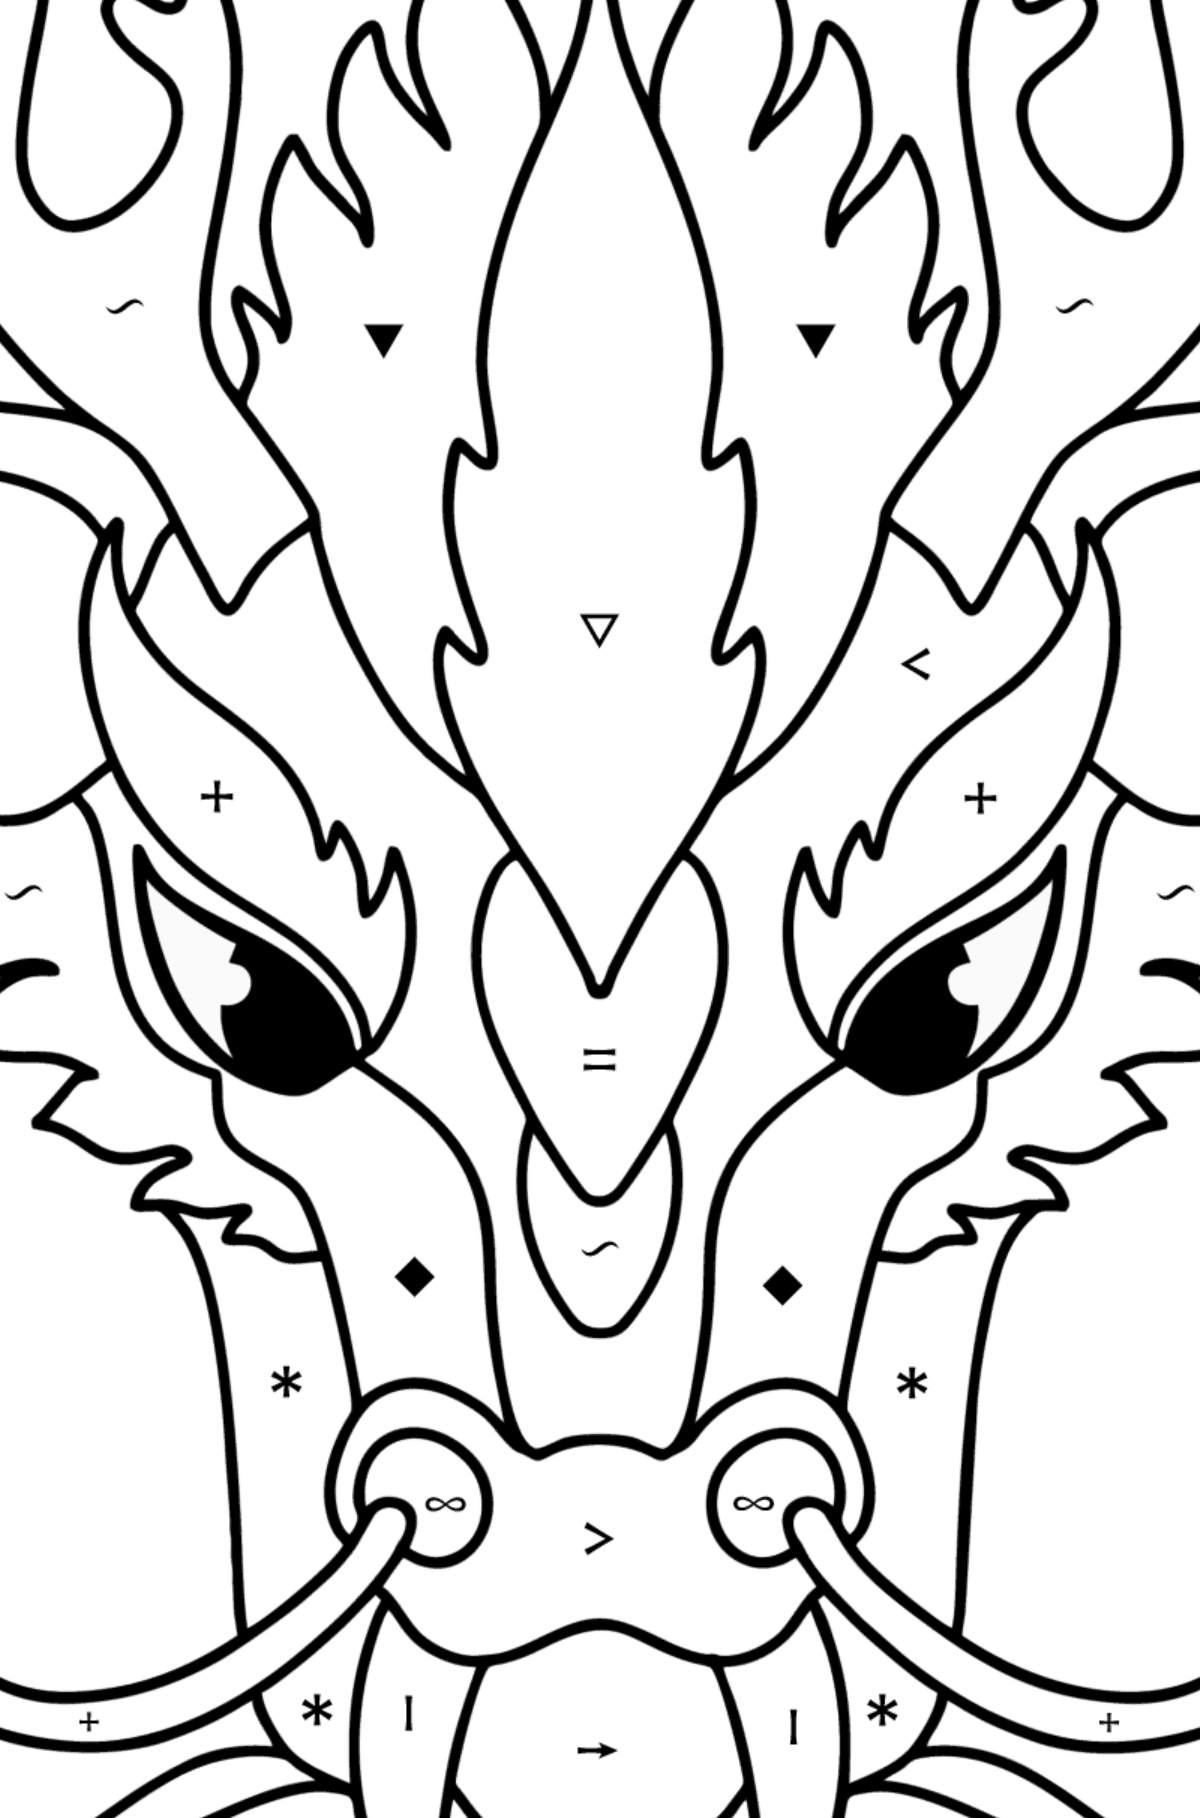 Dragon head coloring page - Coloring by Symbols for Kids